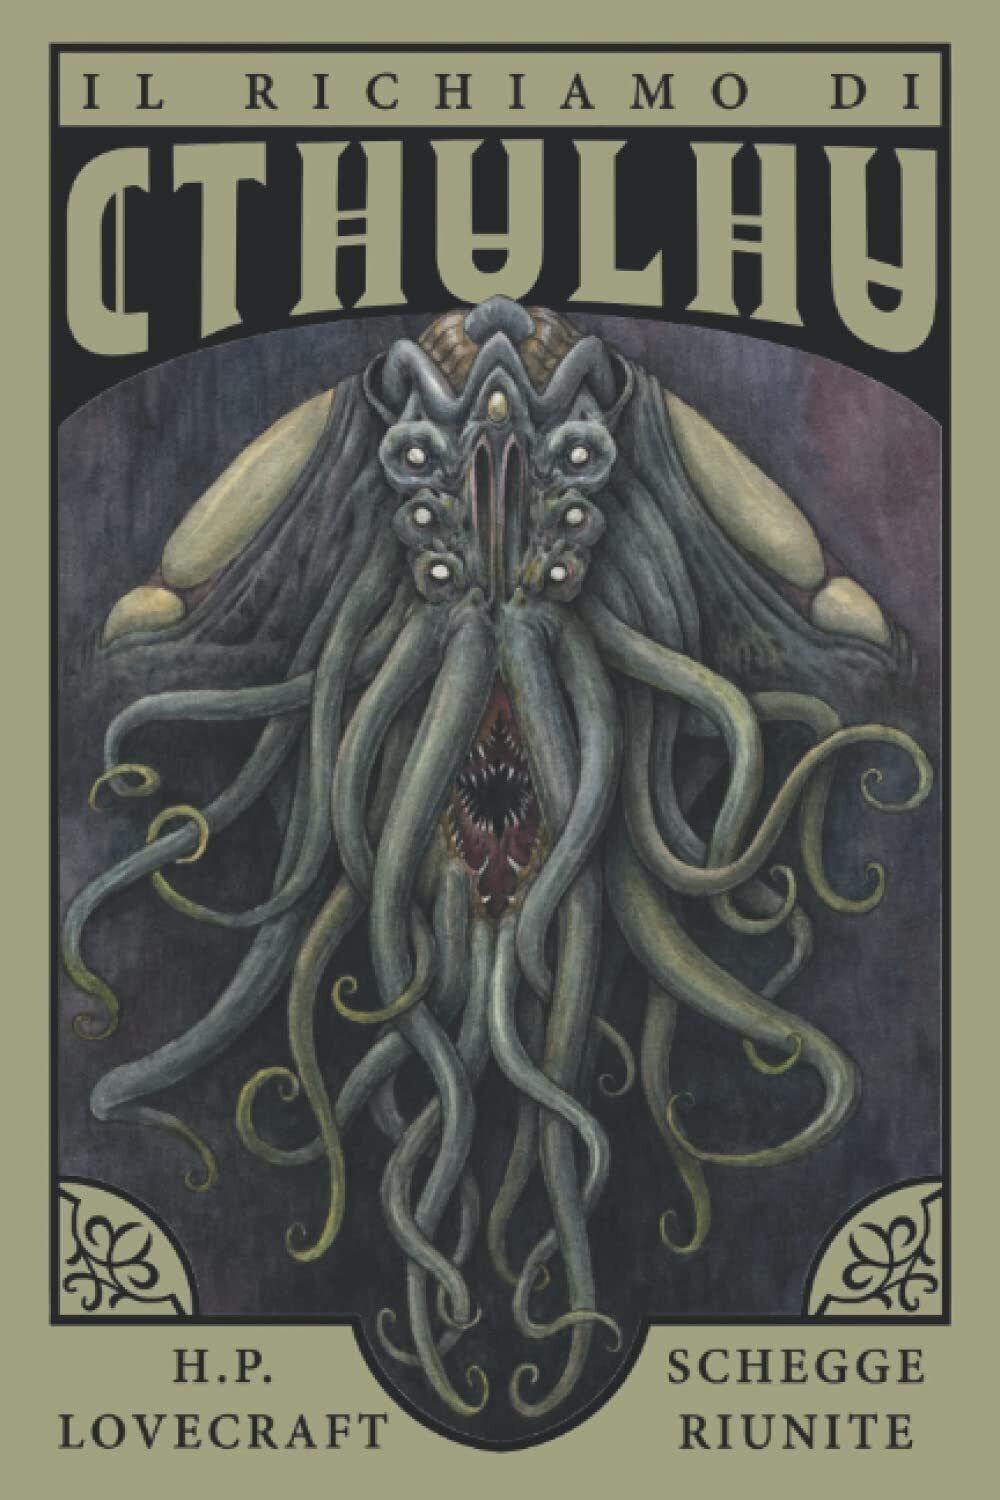 Il Richiamo Di Cthulhu - Howard Phillips Lovecraft - Independently , 2021